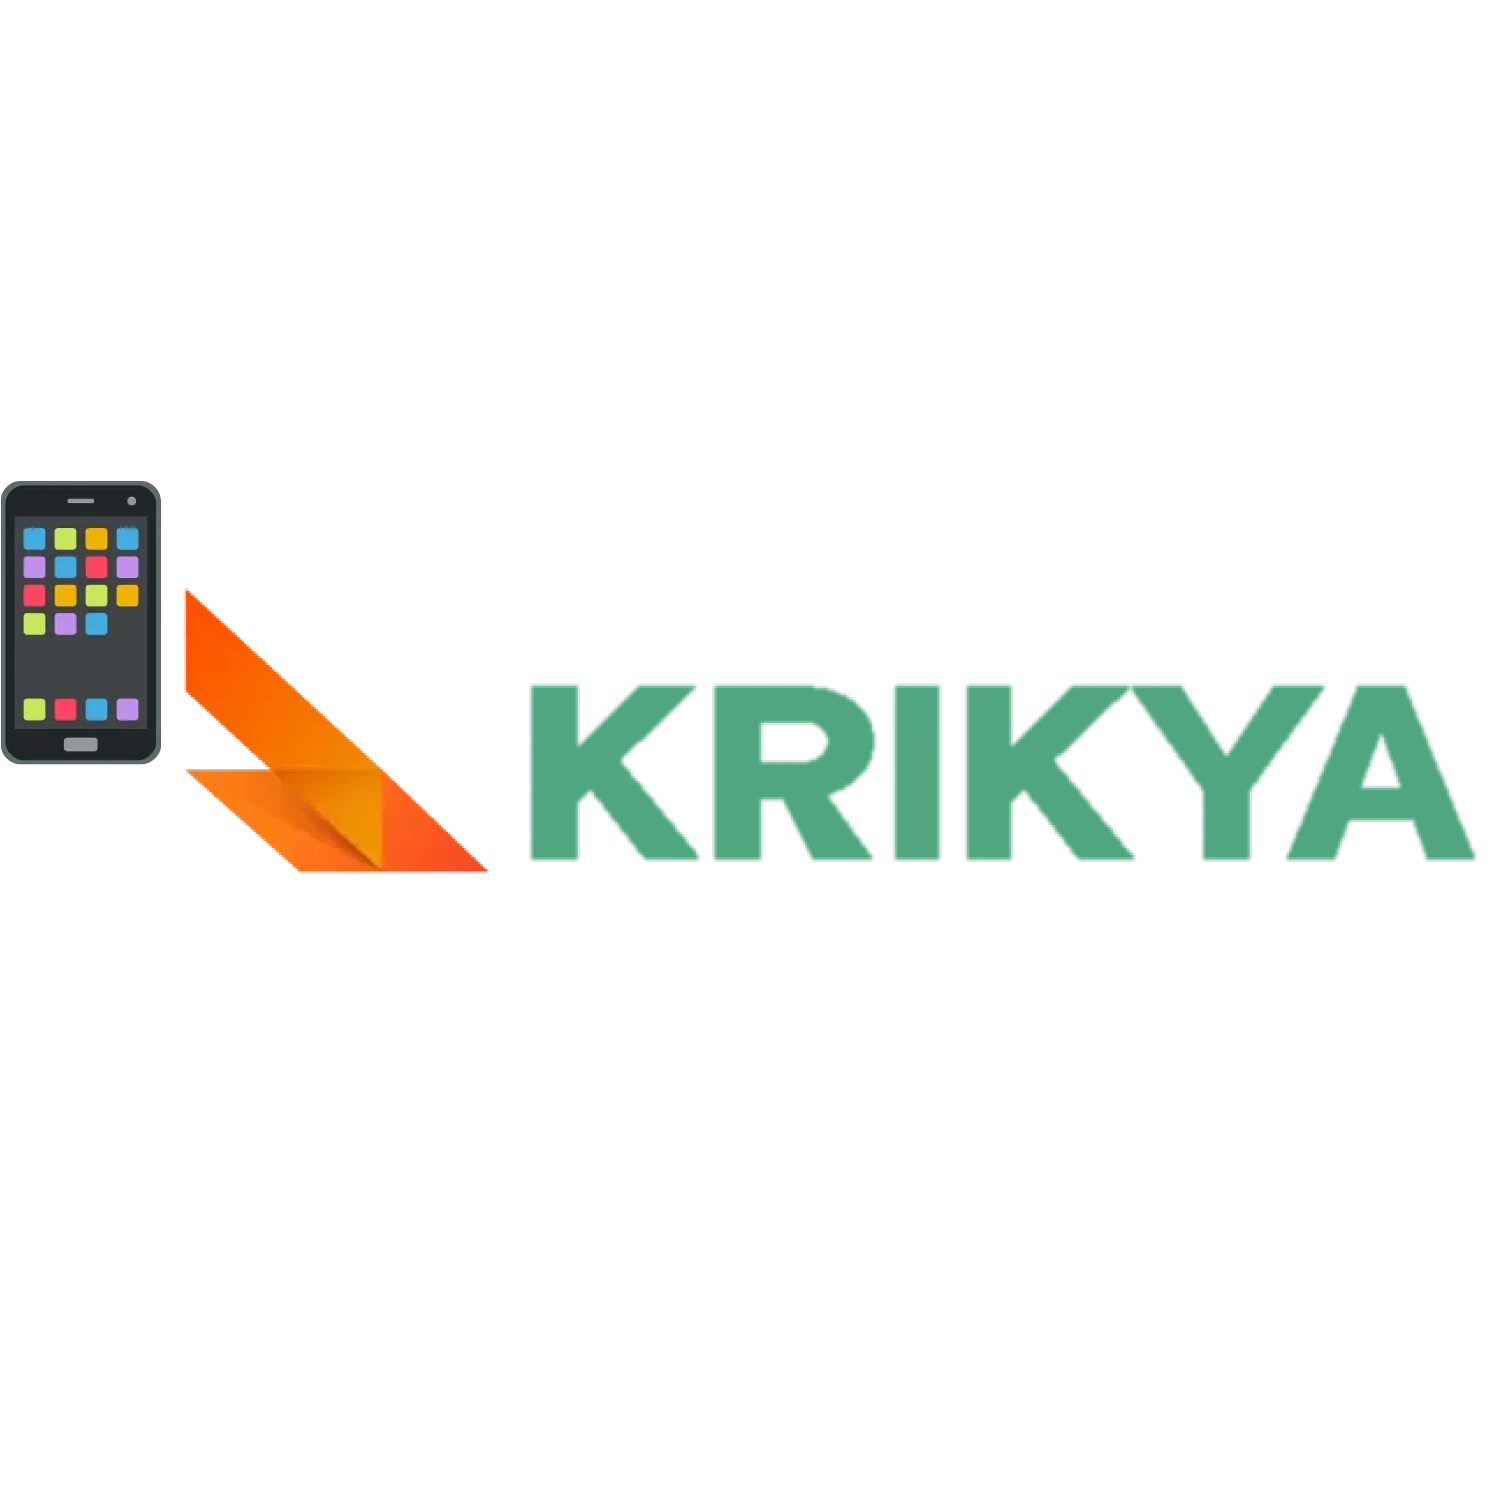 Use the Krikya app for betting in Bangladesh.